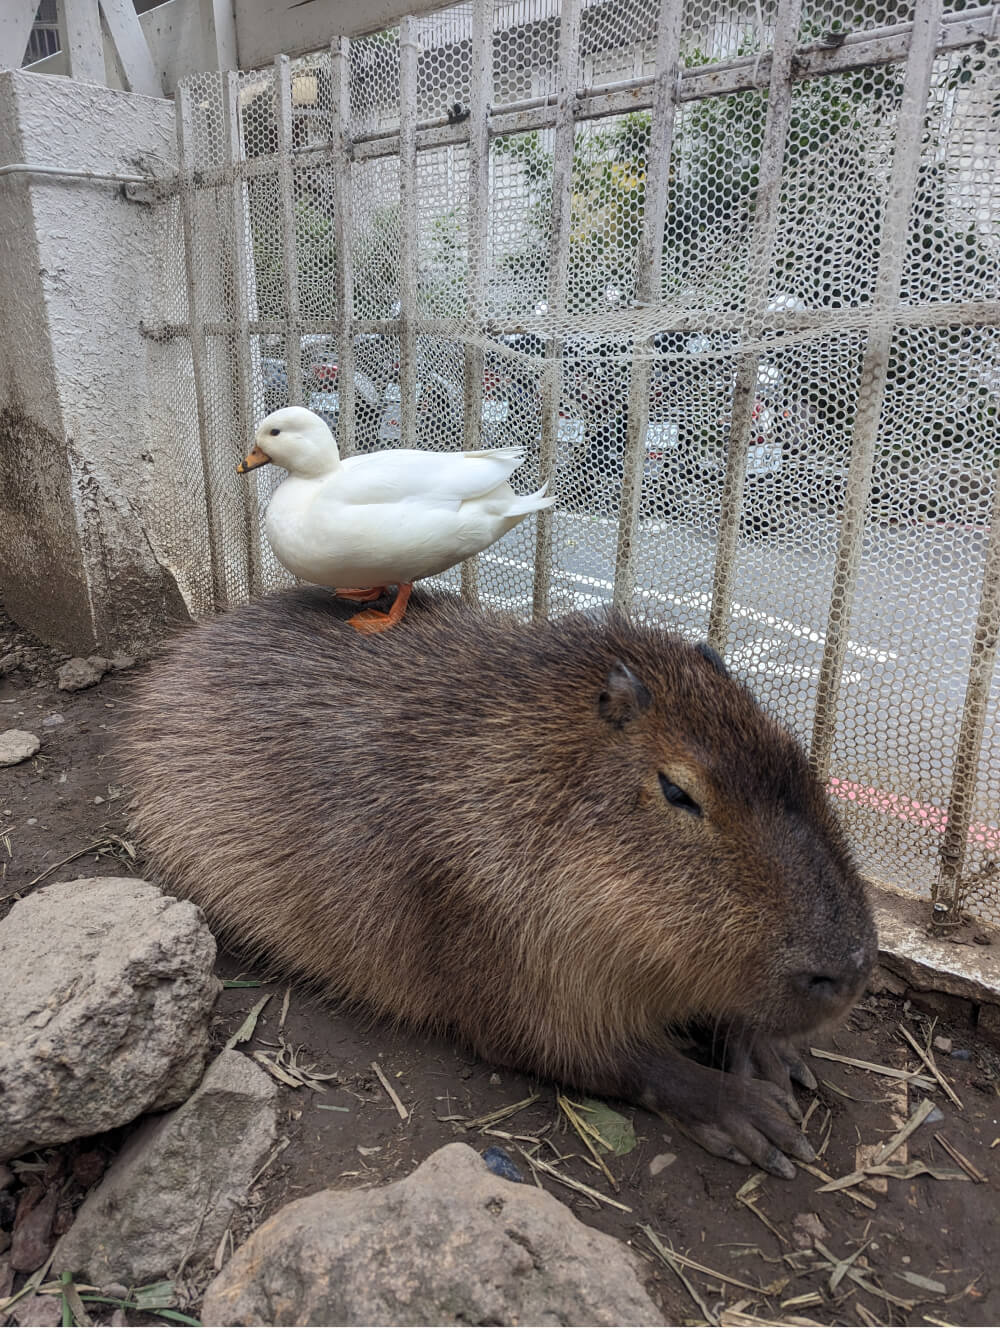 A capybara with a duck on top of it